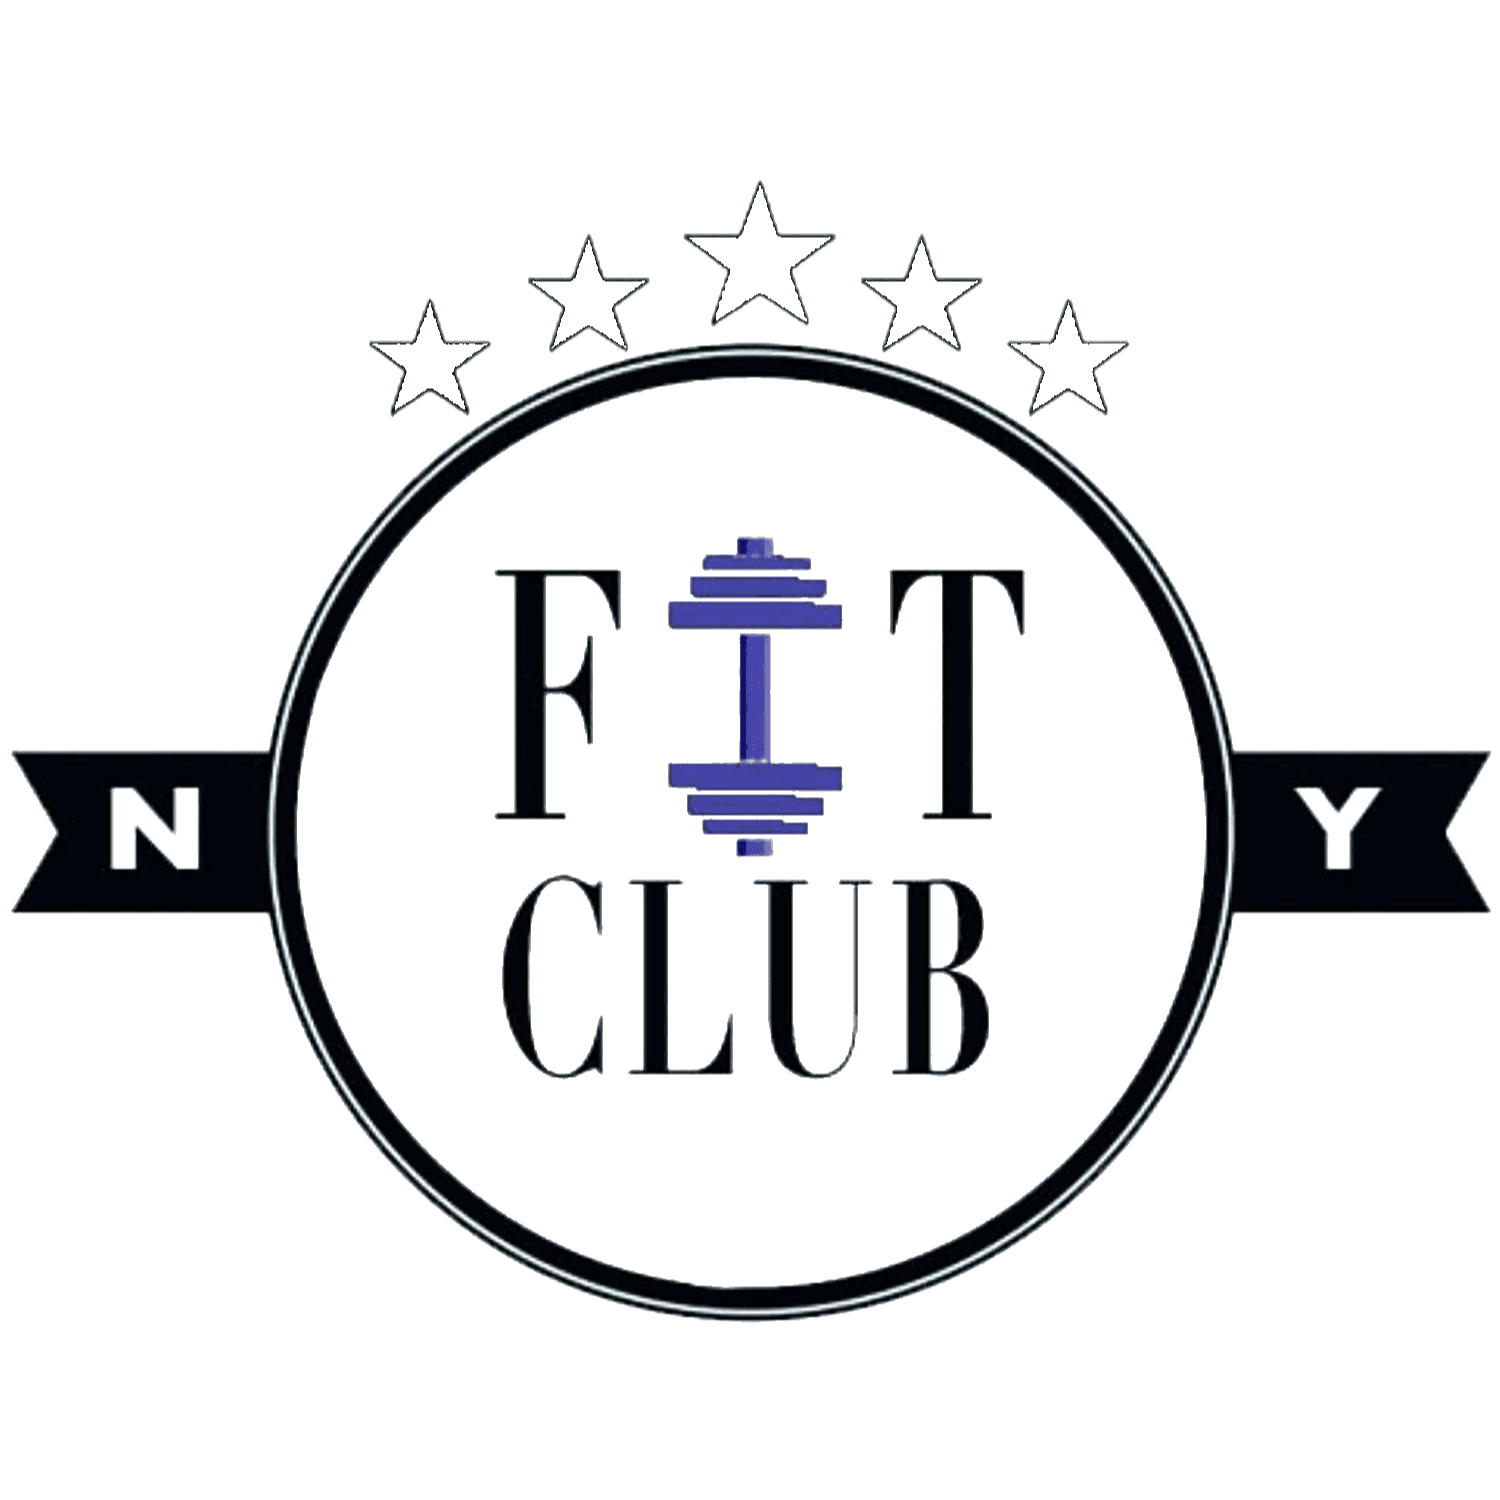 Fit Club NY Logo Fit Club NY Physical Therapy New York (646)875-8348